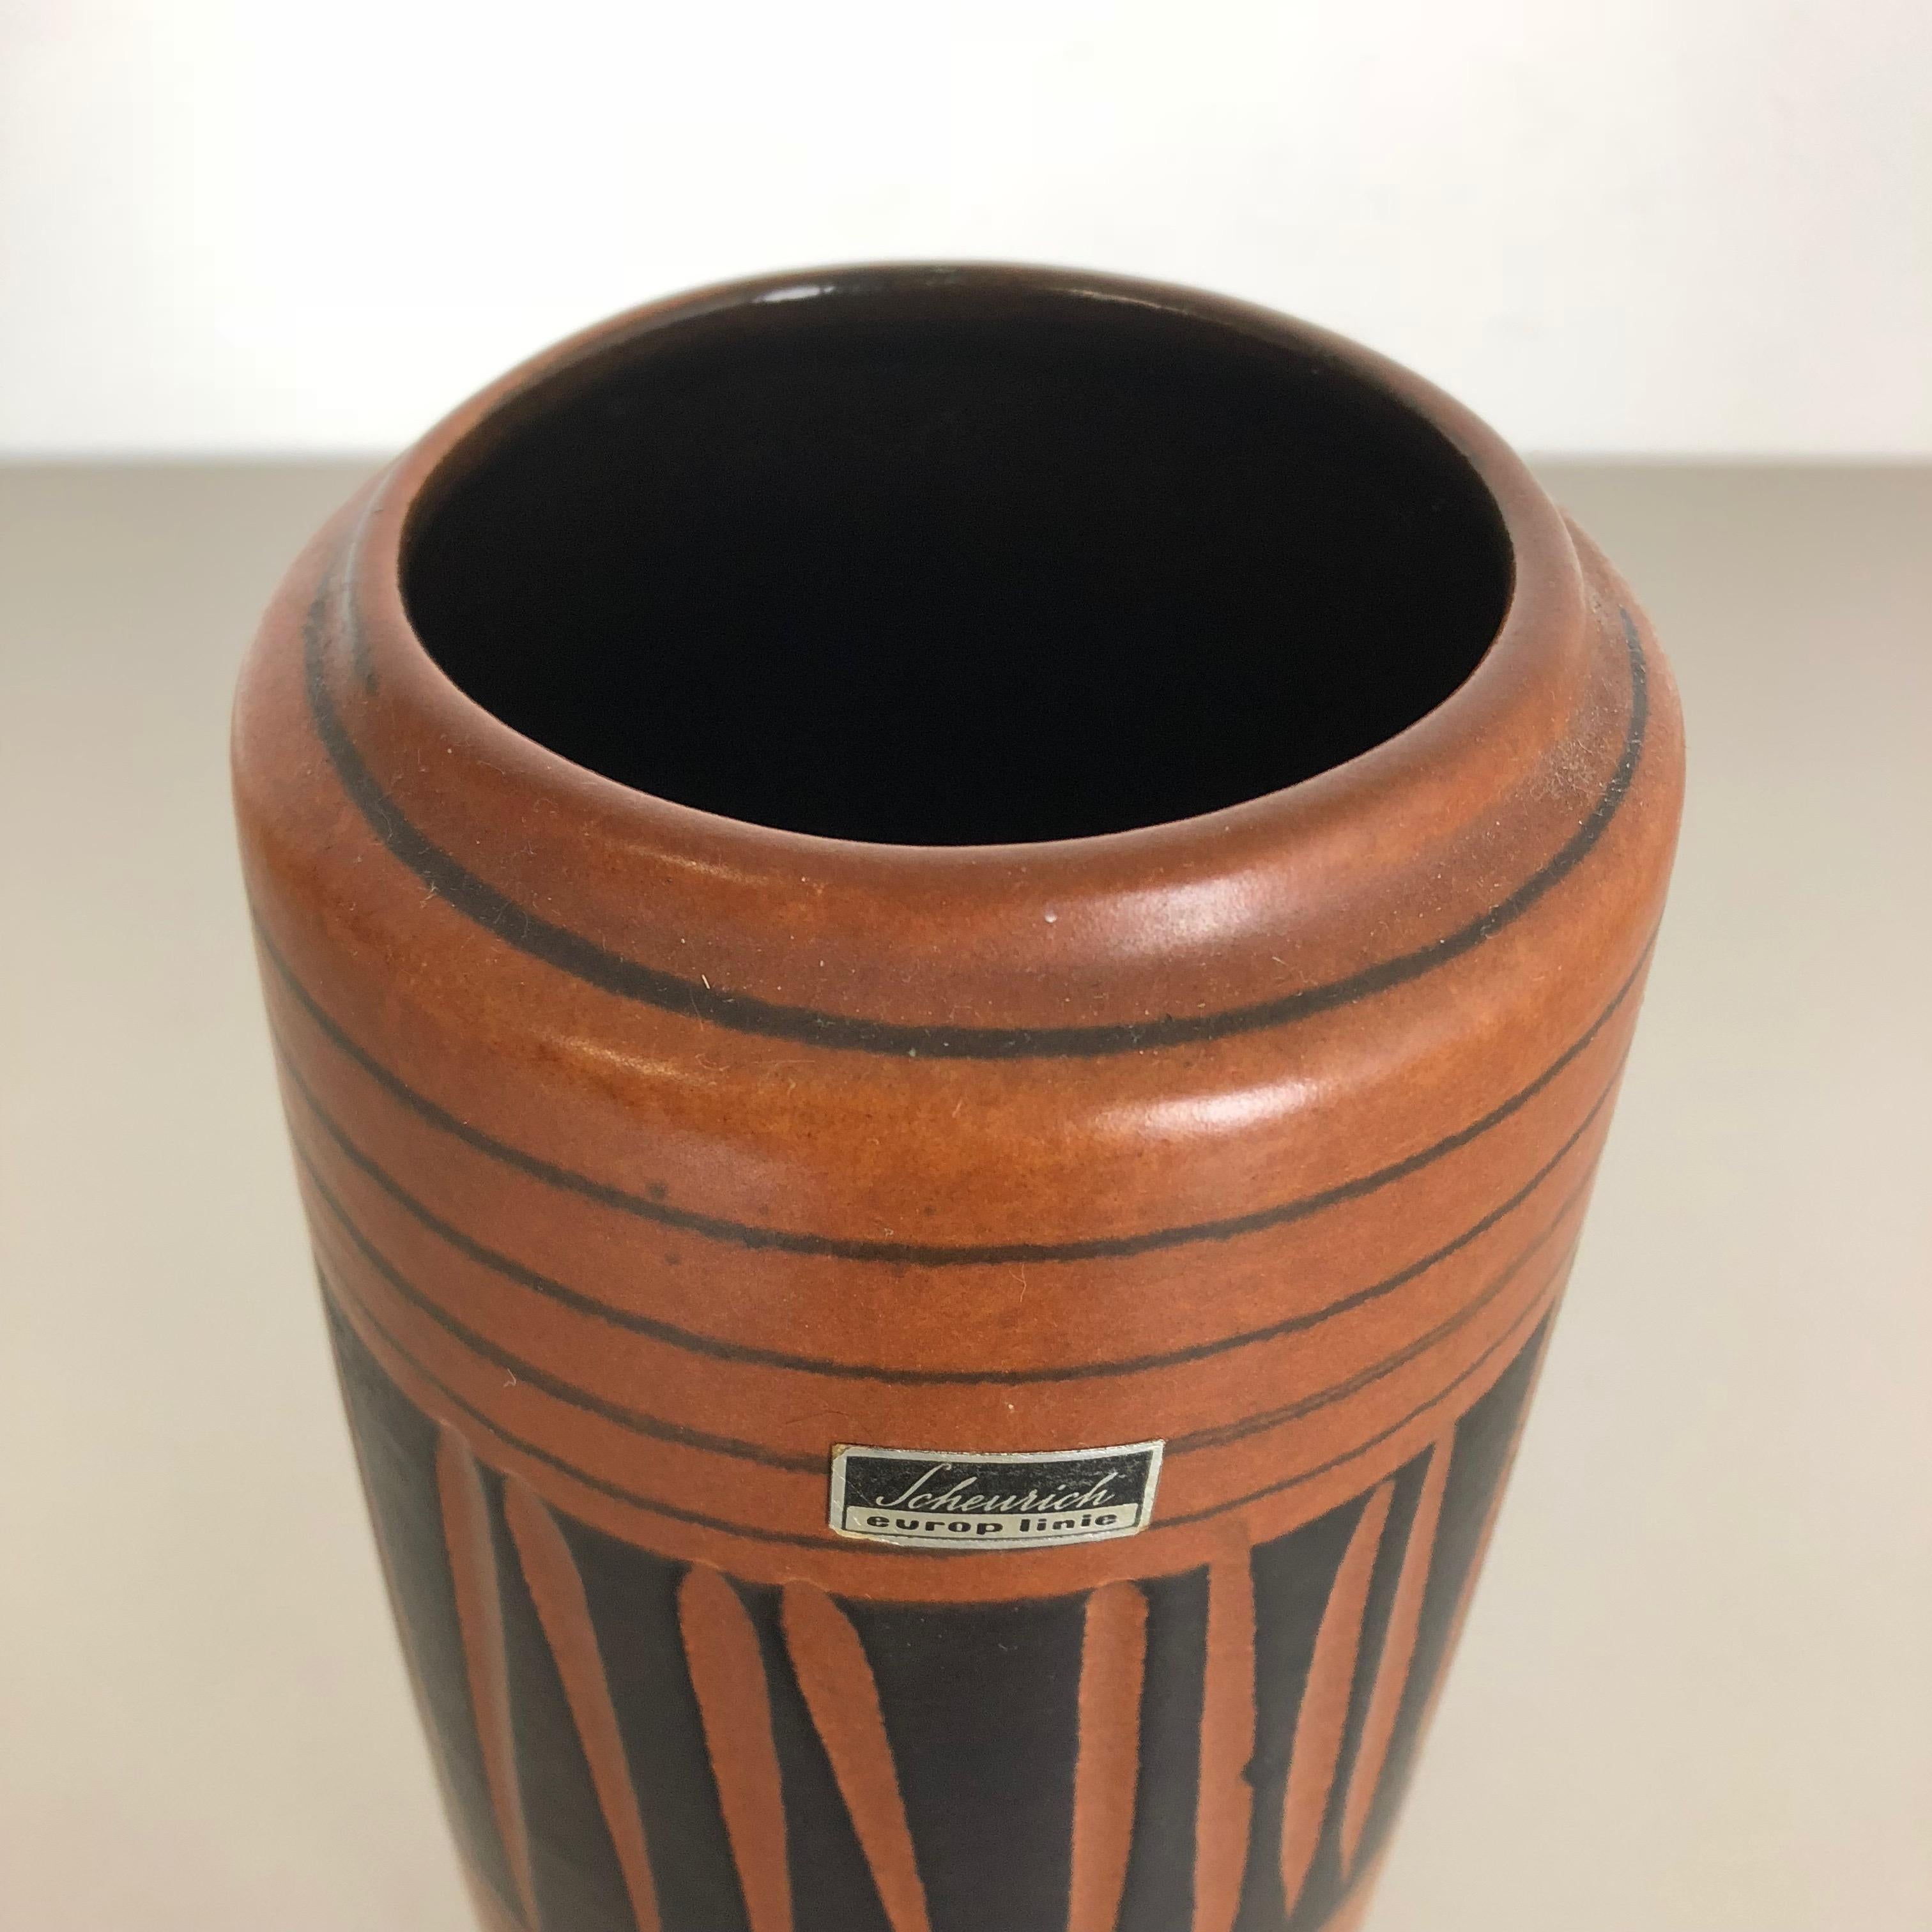 Extraordinary Vintage Pottery Fat Lava Vase Made by Scheurich, Germany, 1970s For Sale 3